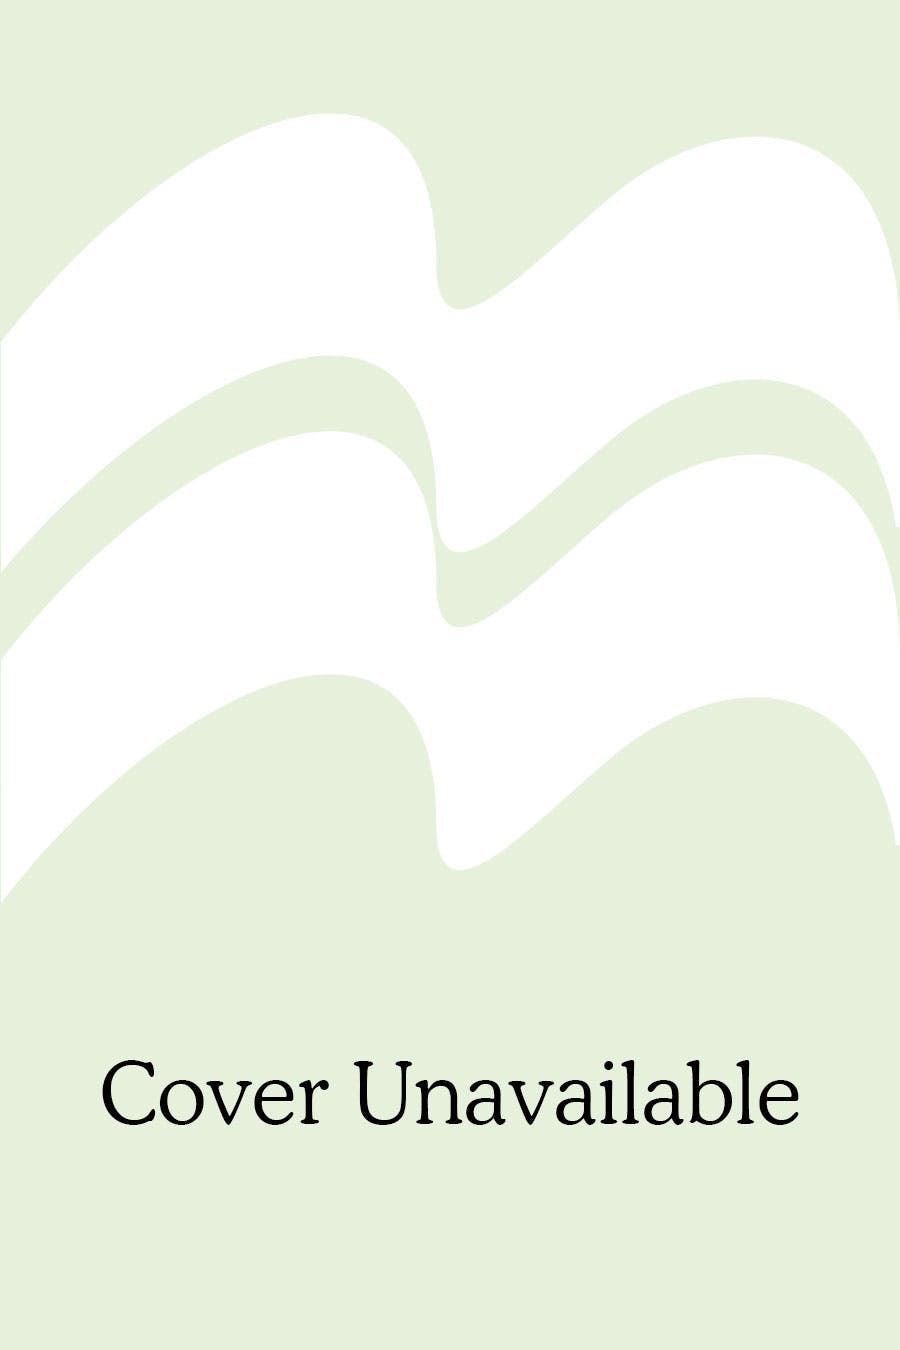 Cover for the book titled as: Nine Levels Down